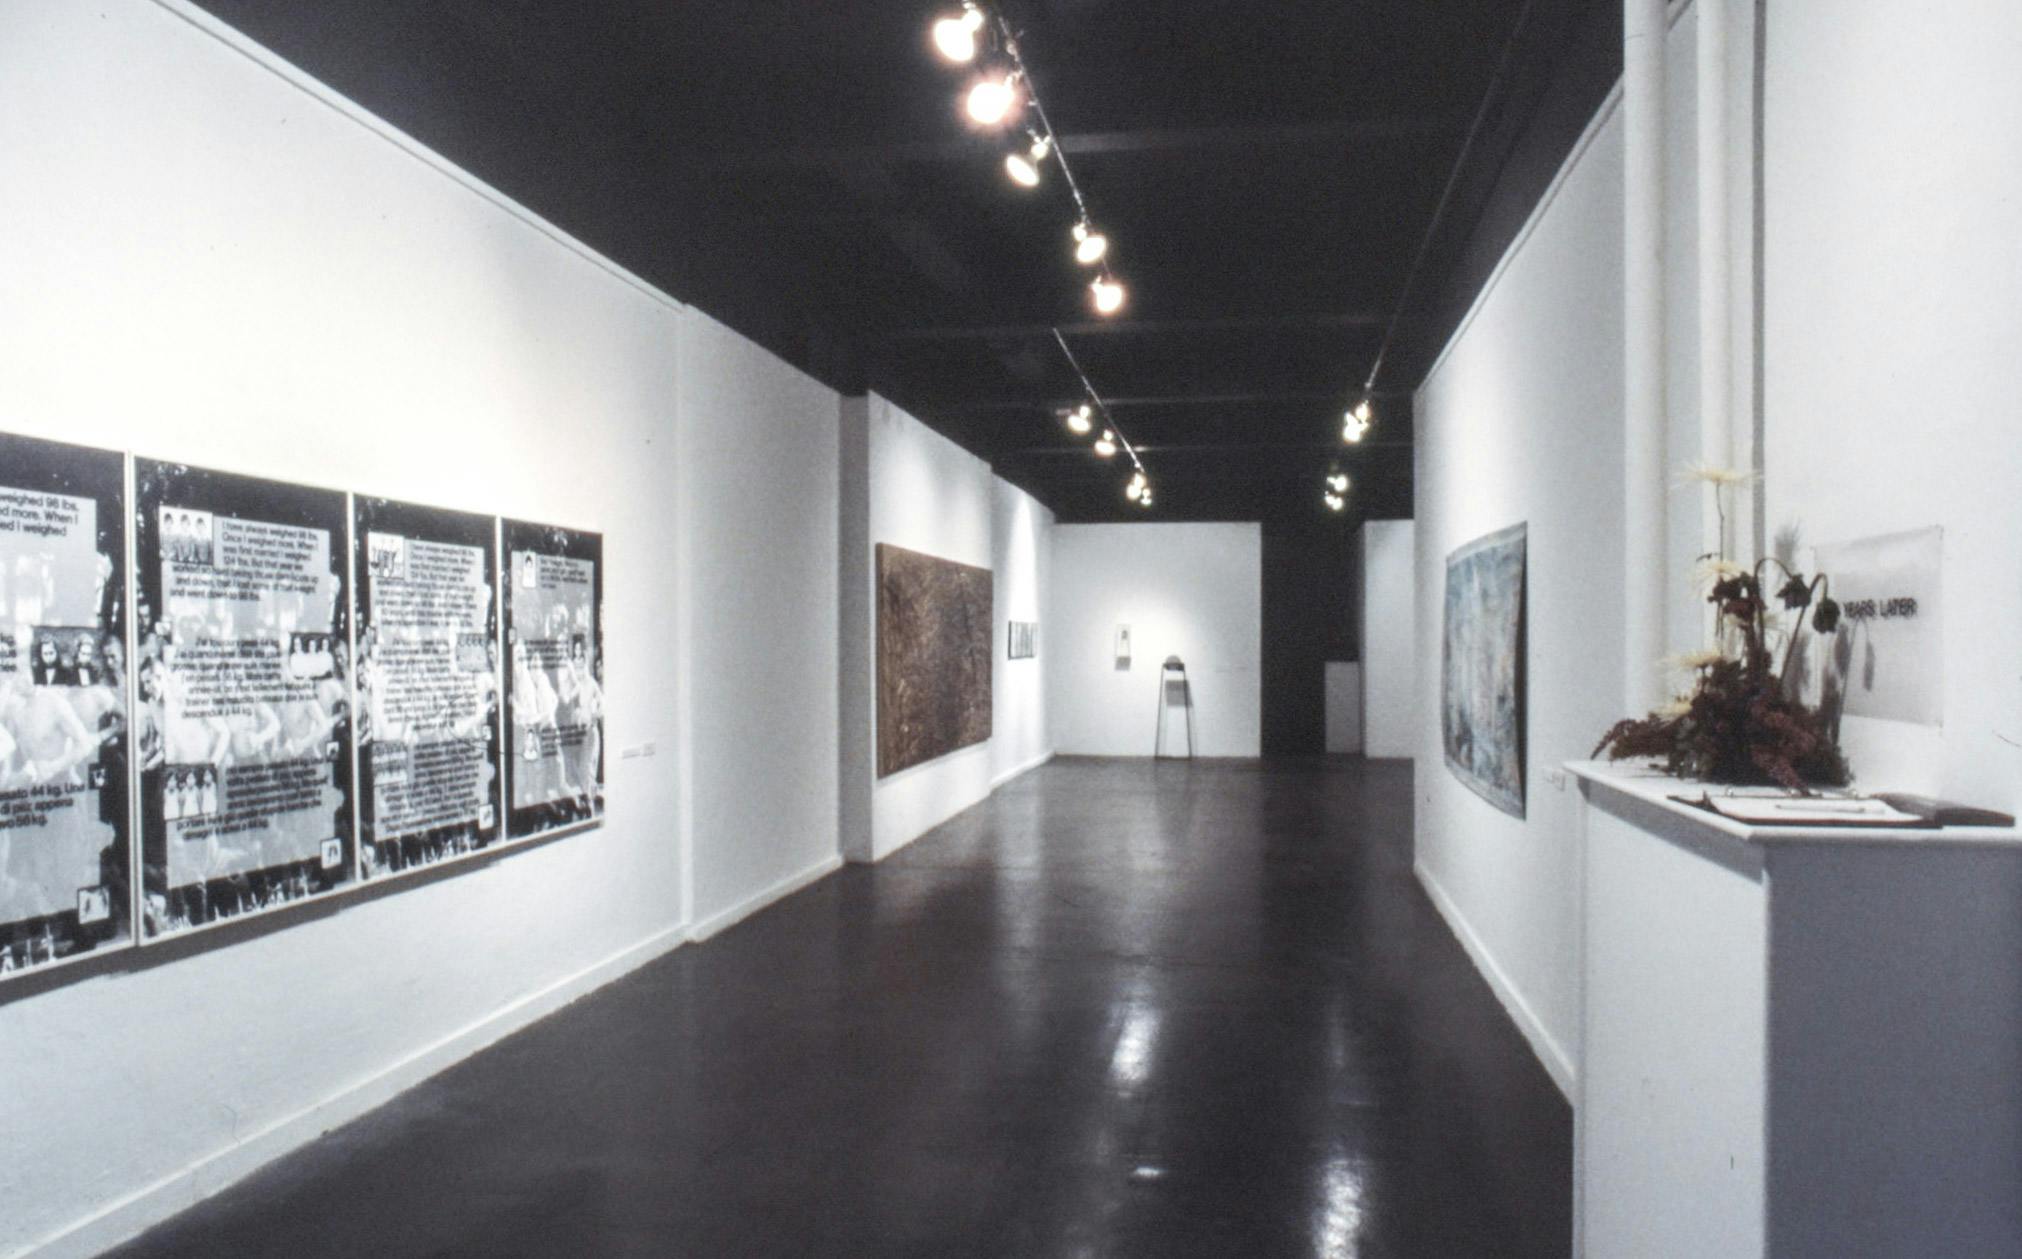 Several artworks visible in the hallway of a gallery. The works include large abstract paintings on canvas and paper, large framed photos of a group of people with text overlay, and small sculptures. 